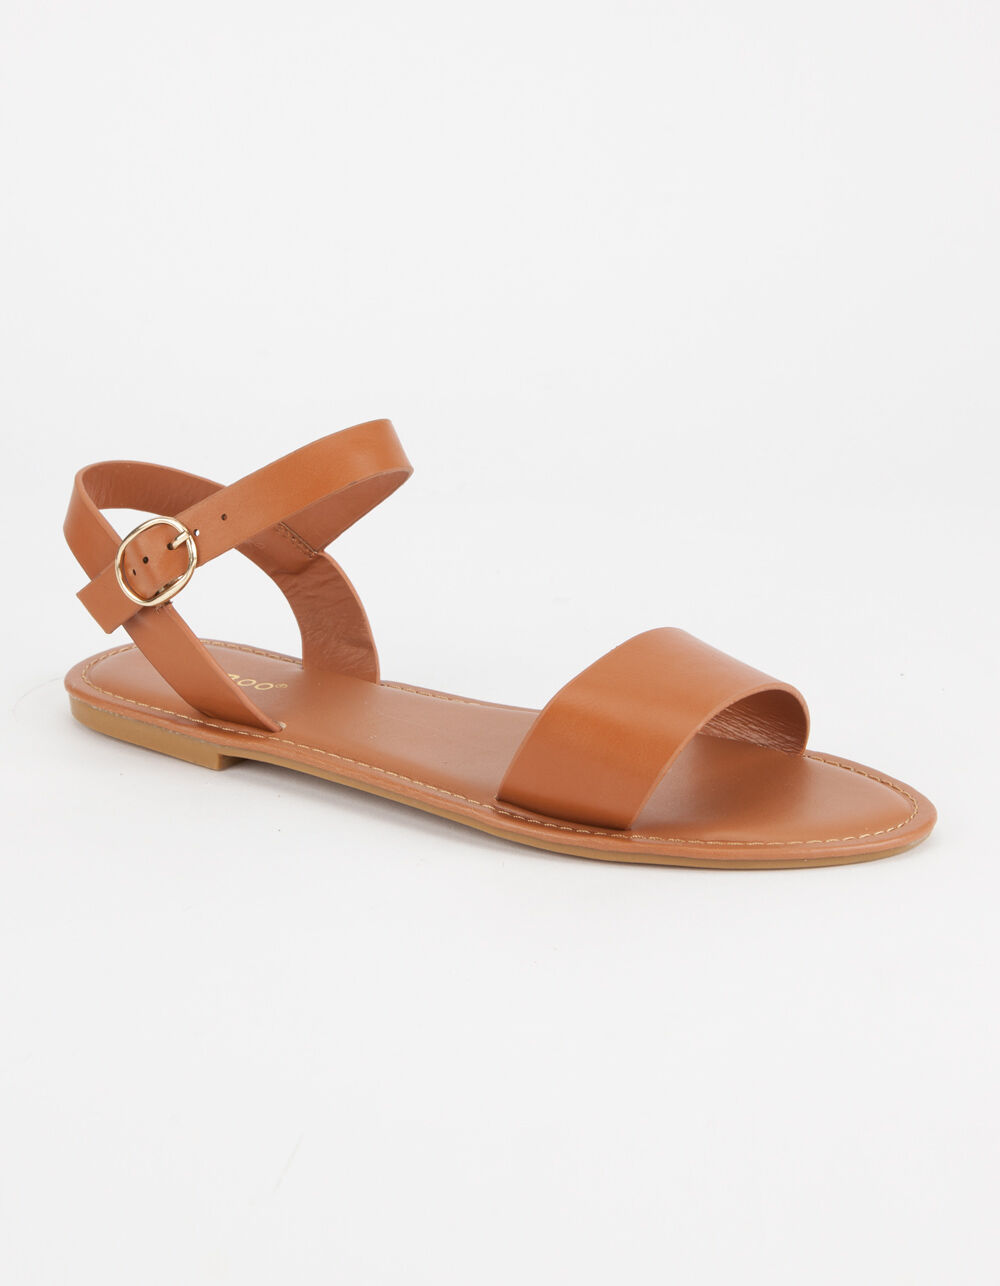 BAMBOO Ankle Strap Womens Sandals - TAN | Tillys